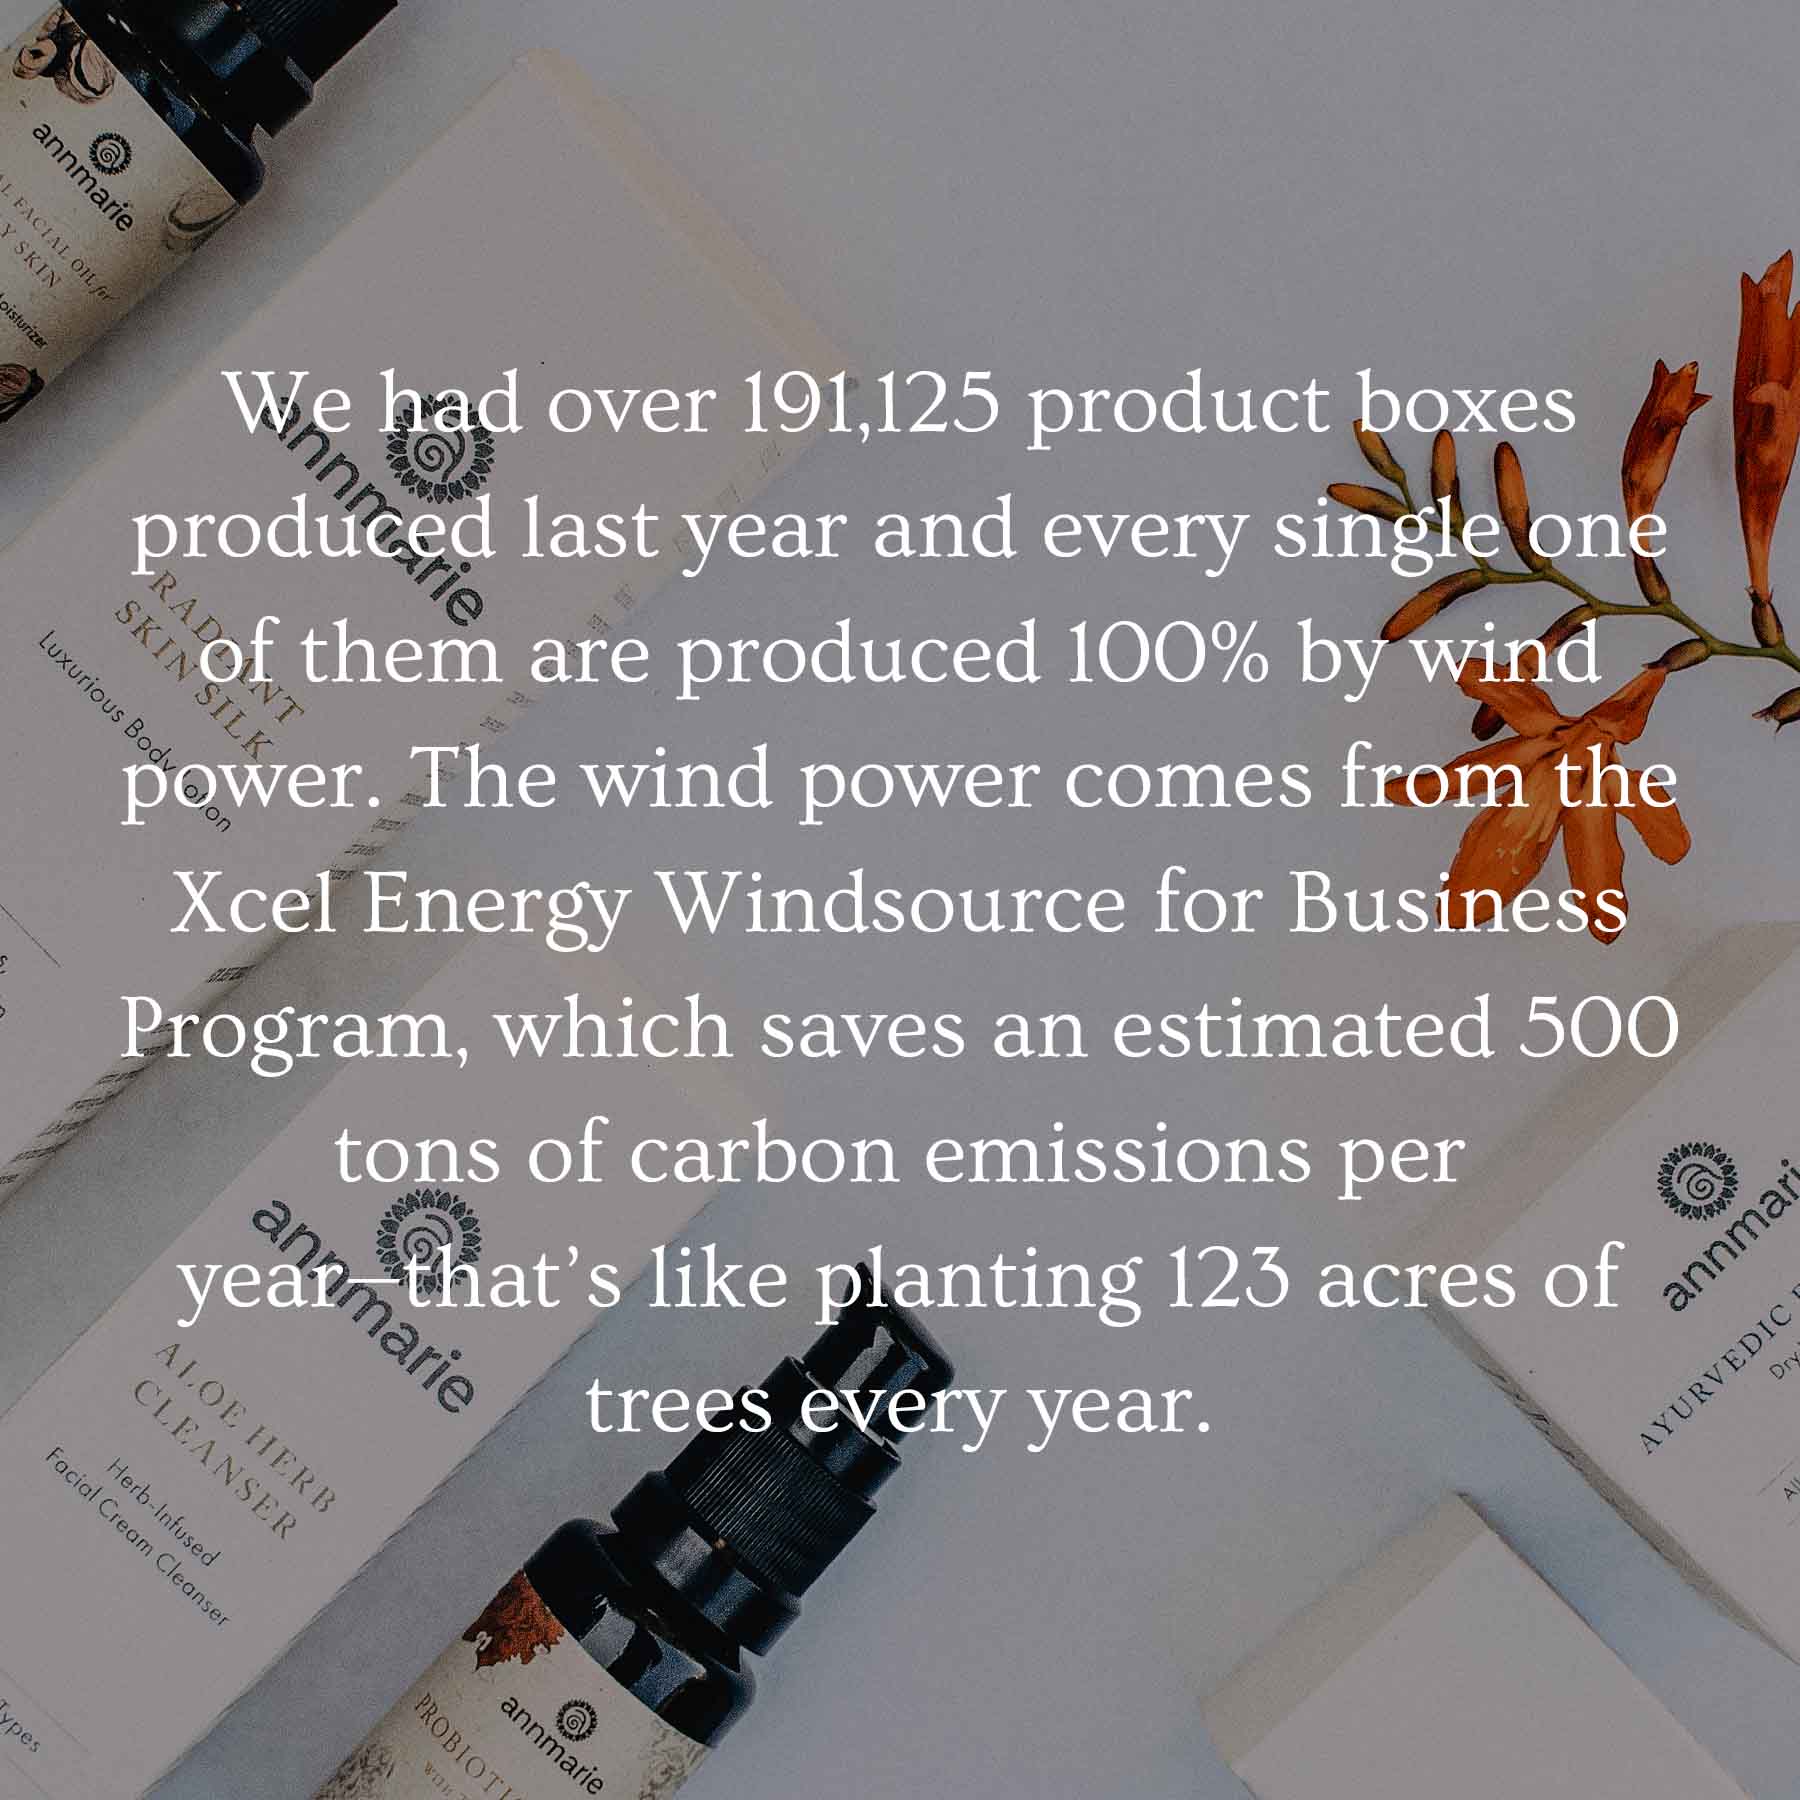 We had over 191,125 product boxes produced last year and every single one of them are produced 100% by wind power. The wind power comes from the Xcel Energy Windsource for Business Program, which saves an estimated 500 tons of carbon emissions per year—that’s like planting 123 acres of trees every year.